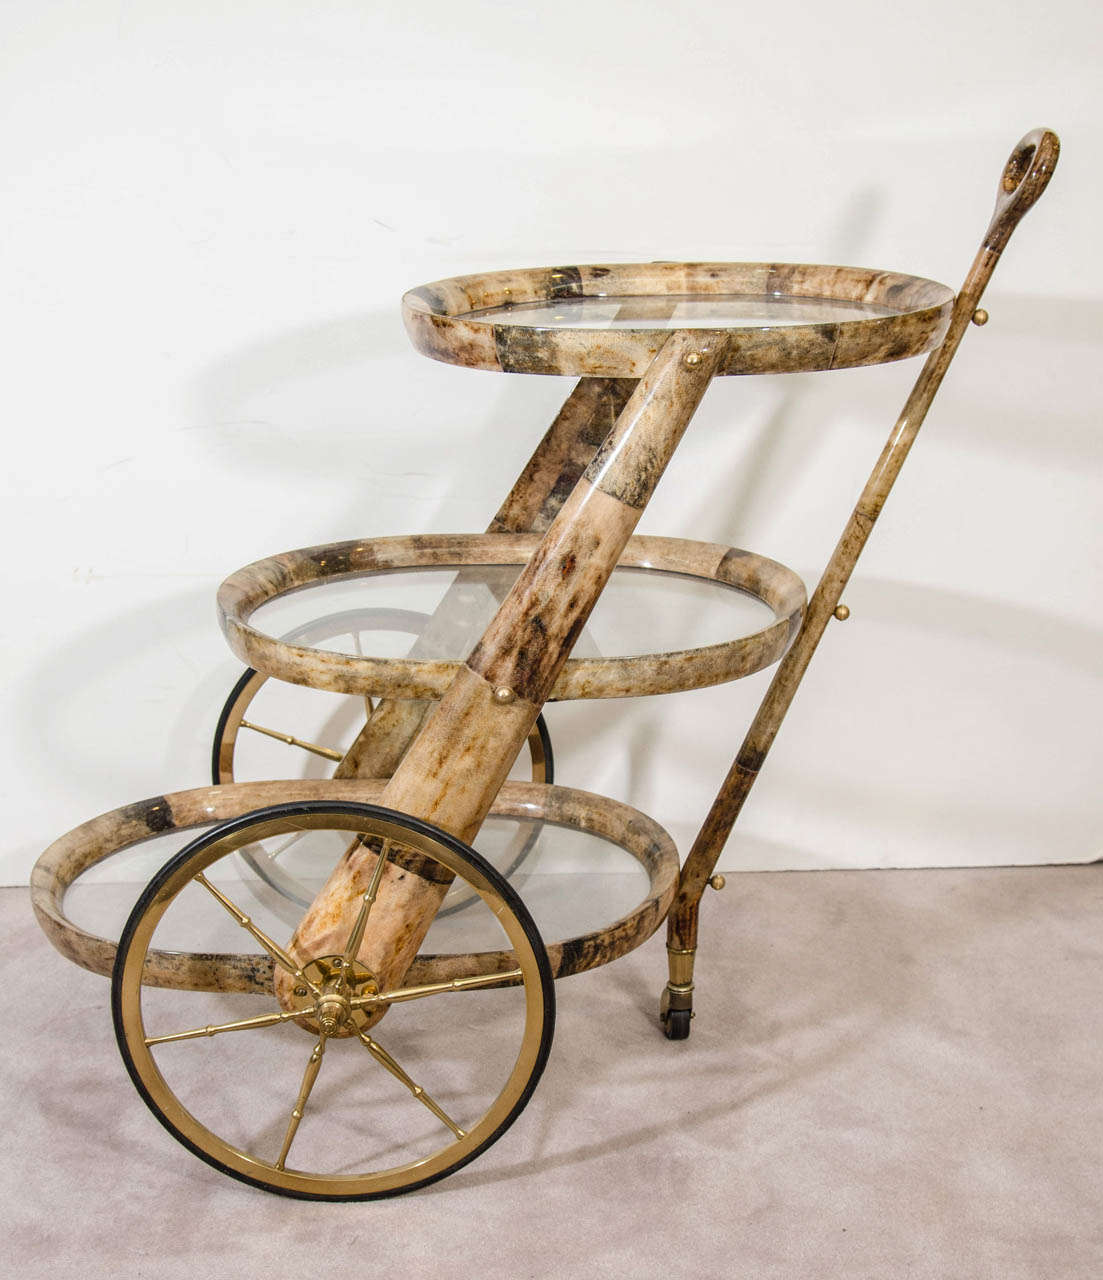 A vintage Italian Aldo Tura patchwork style lacquered goatskin bar cart with three glass top oval tiers and brass spoked wheels.

Tiers: 
Top: 30" H X 19" D X 17" W.
Middle: 19" H X 22" D X 17" W.
Bottom: 8" H